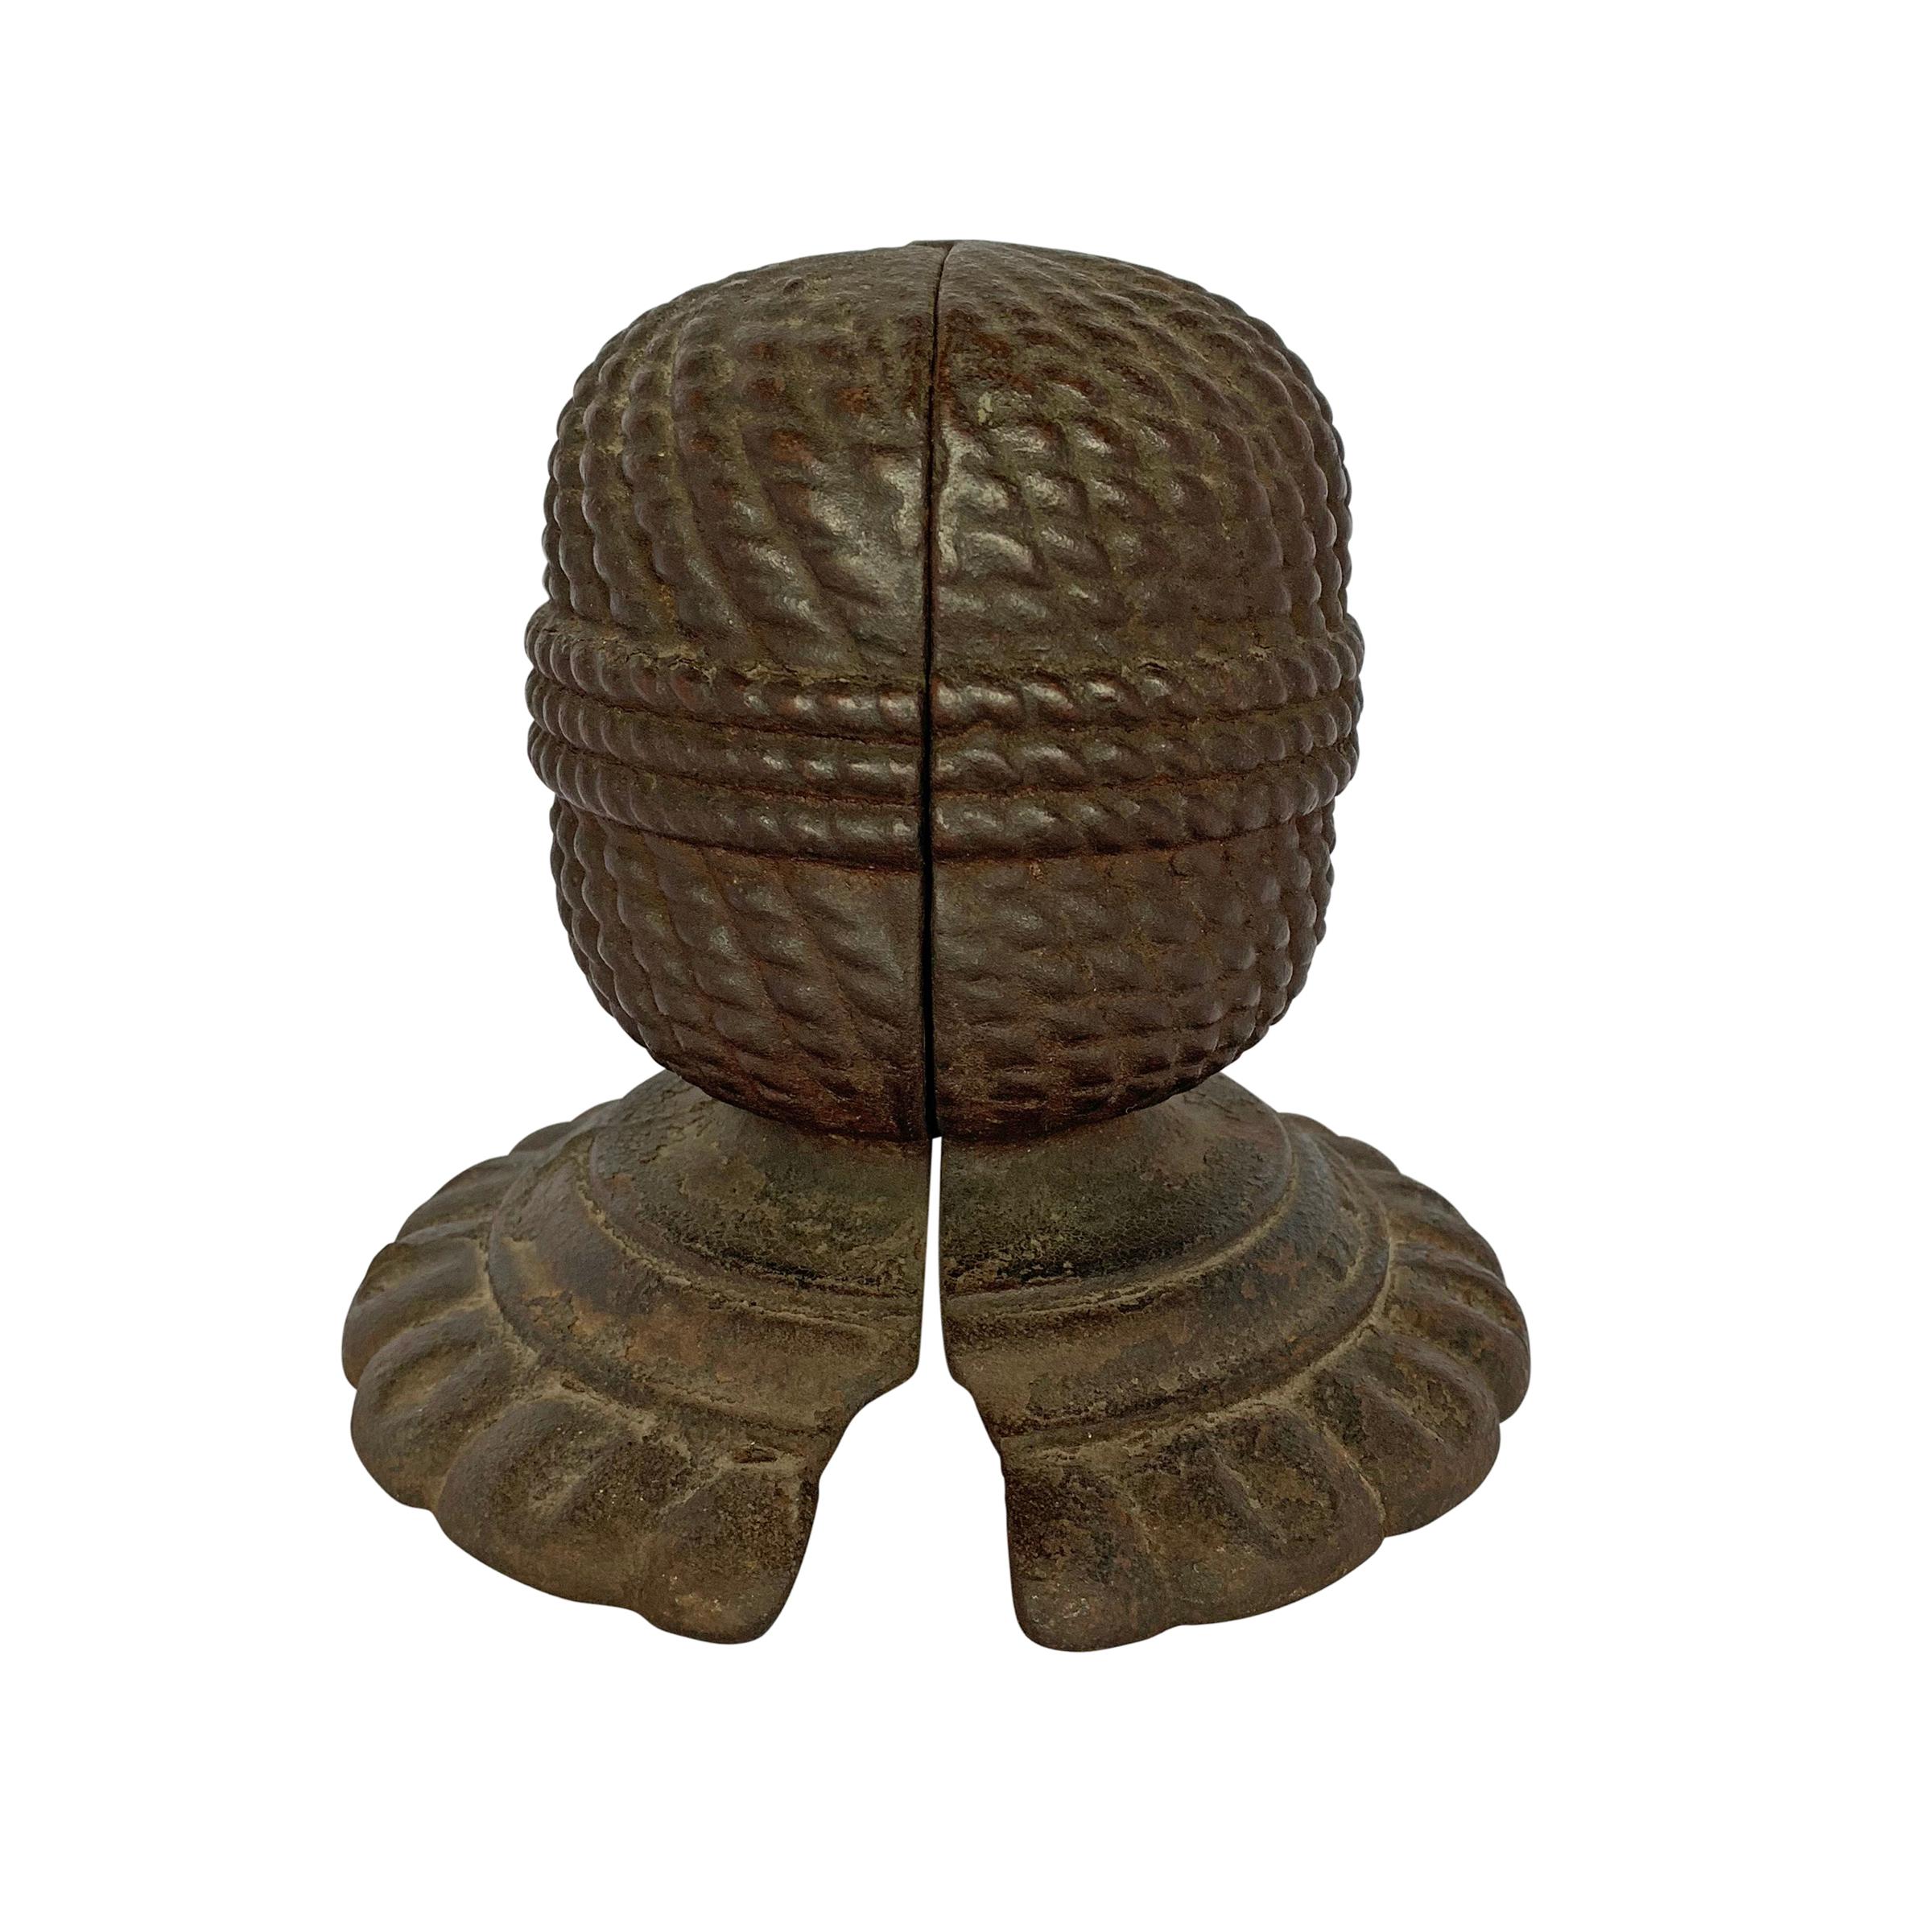 A whimsical 19th century American string holder in shape of a ball of string. The weight of the holder keeps it in place, but opens up when picked up. We have a similar one in our kitchen that we use to truss chickens, tie bundles of herbs for